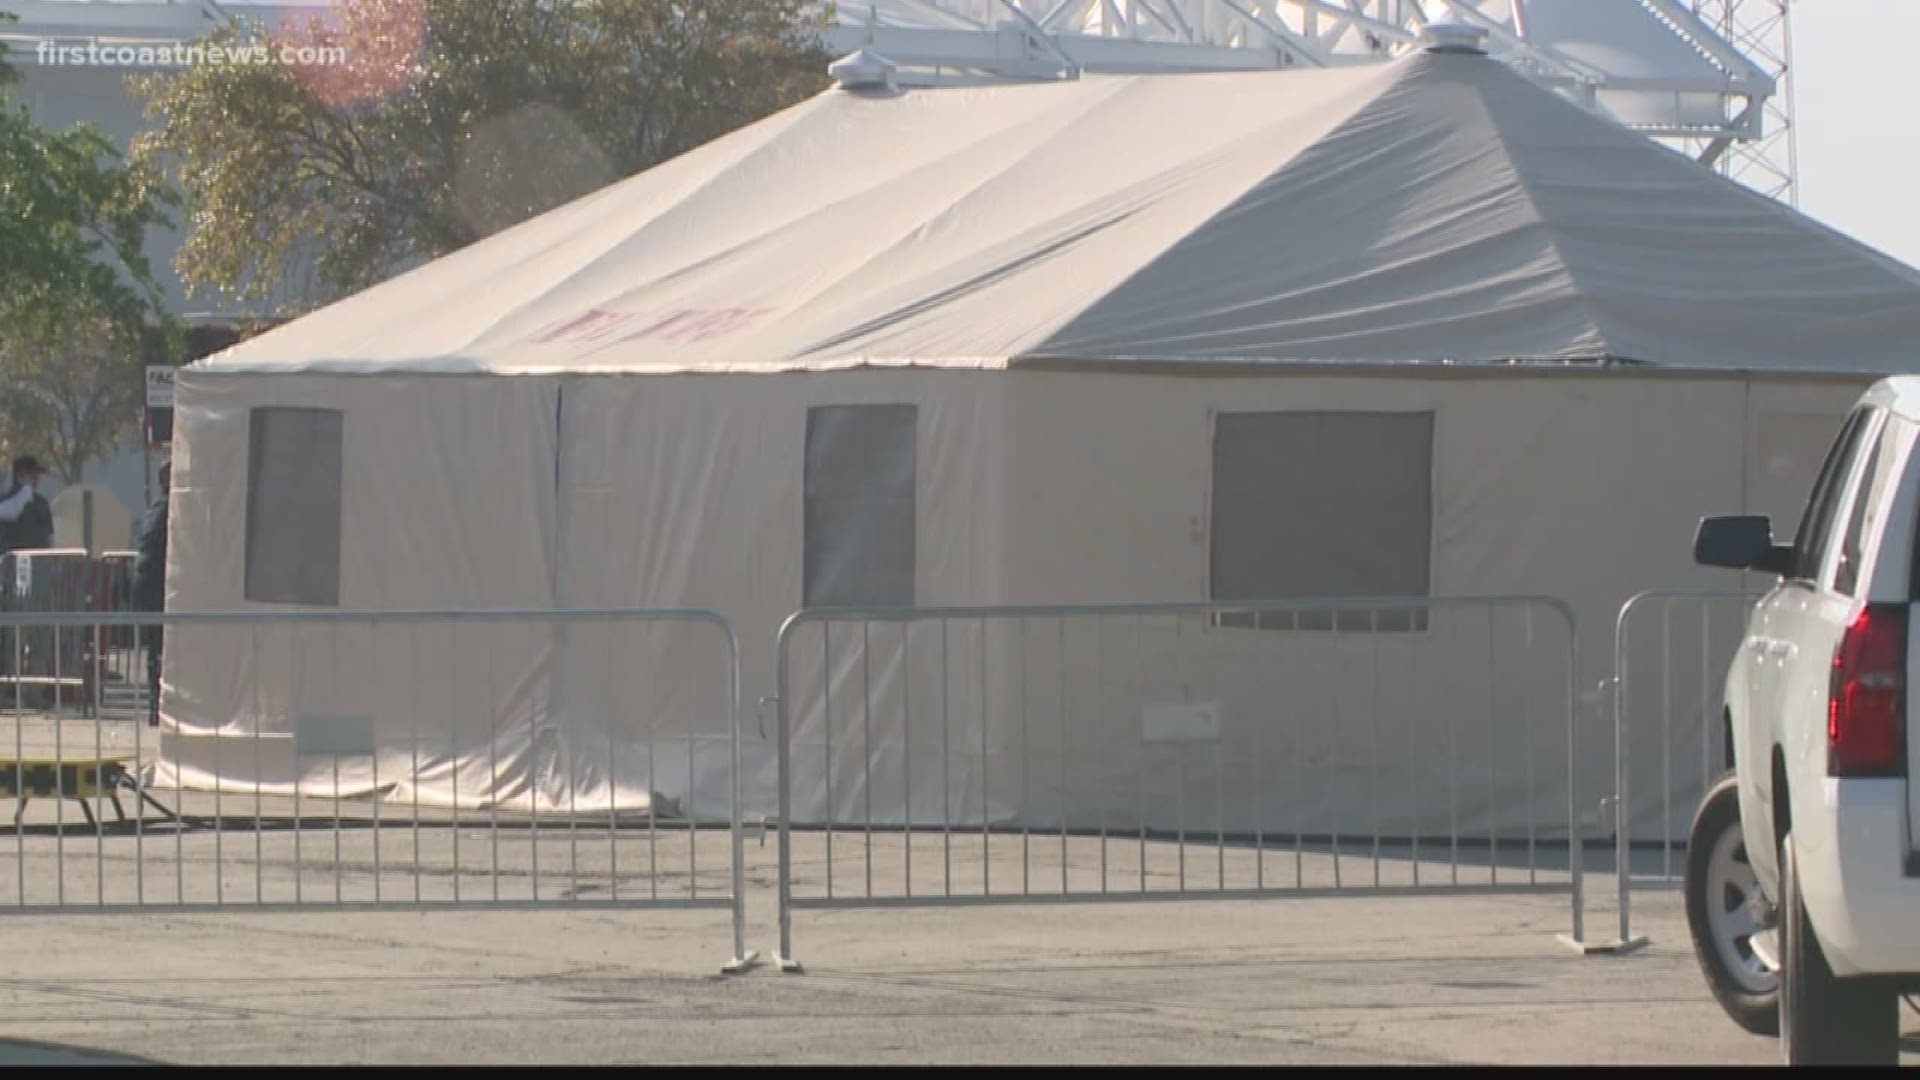 The federal testing site will now be open to people to all ages and people outside of Duval County, but other restrictions are still in place.